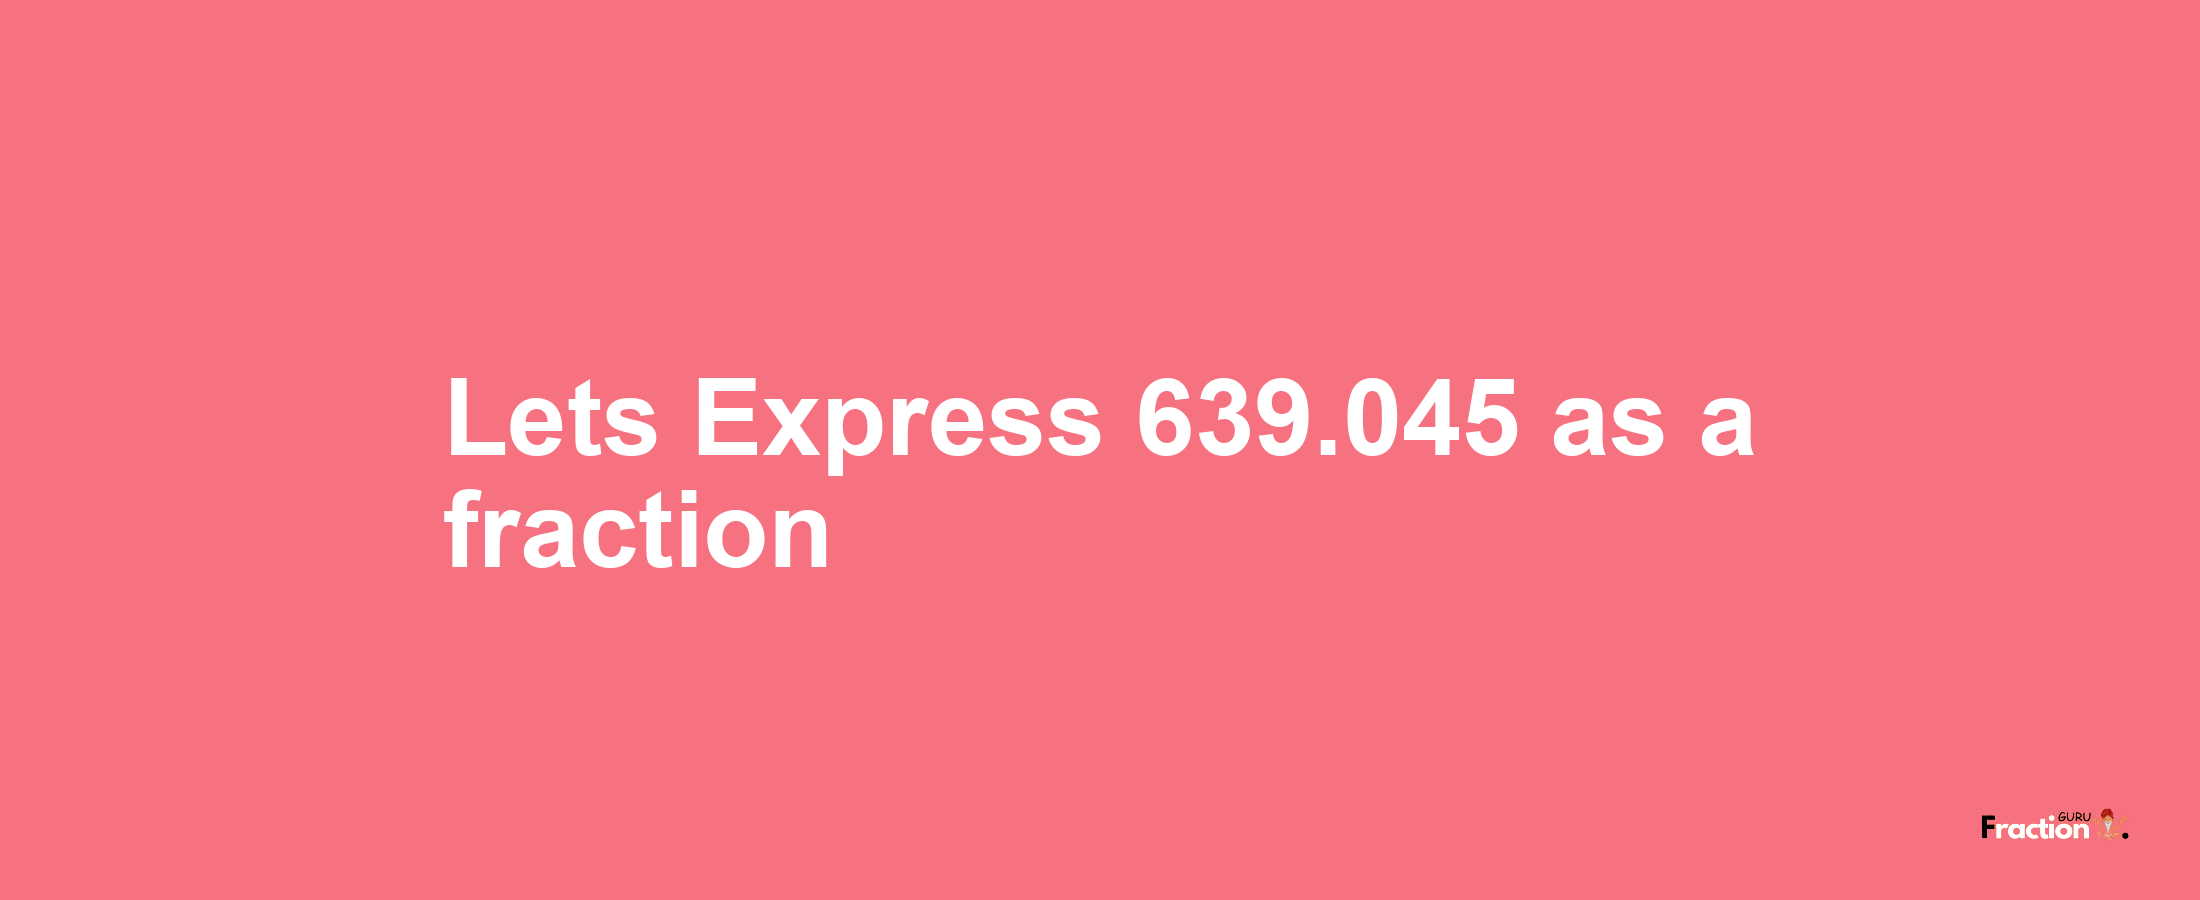 Lets Express 639.045 as afraction